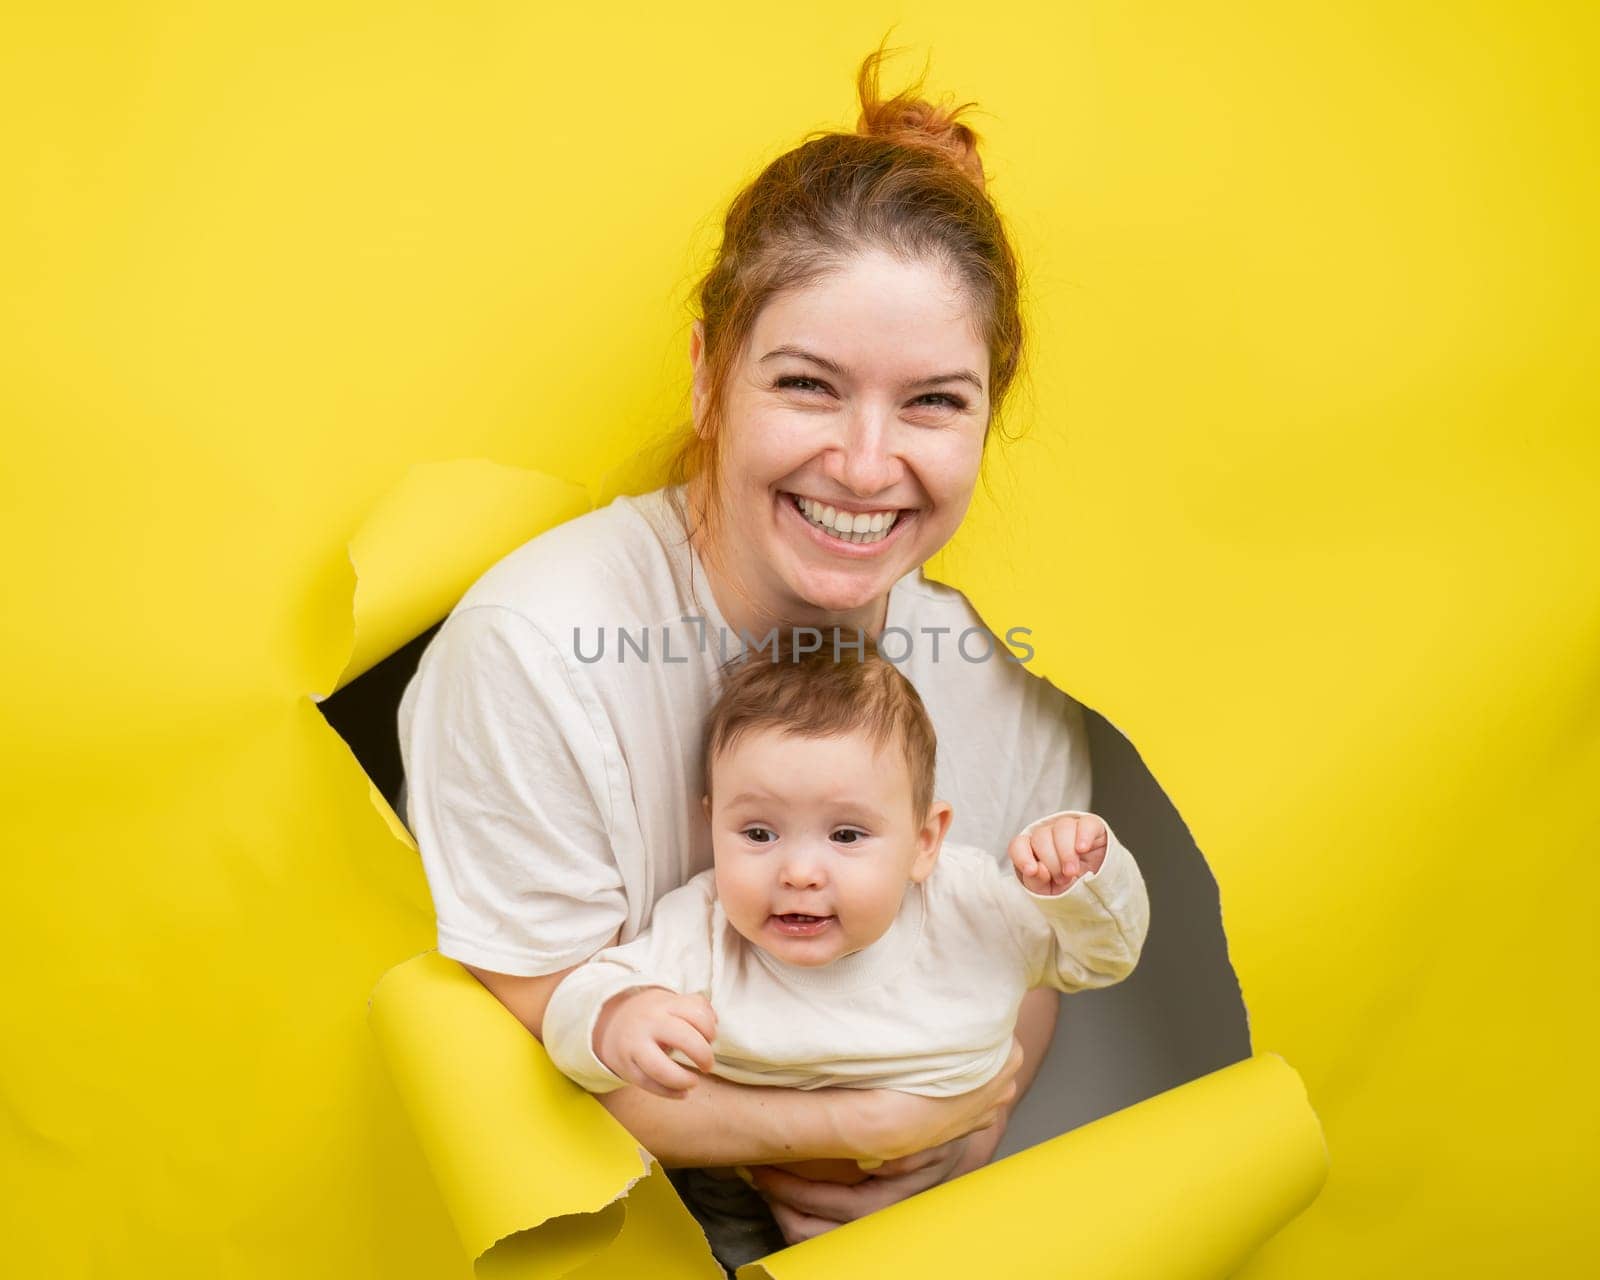 Cheerful Caucasian woman with little son rips and leans out through yellow cardboard background